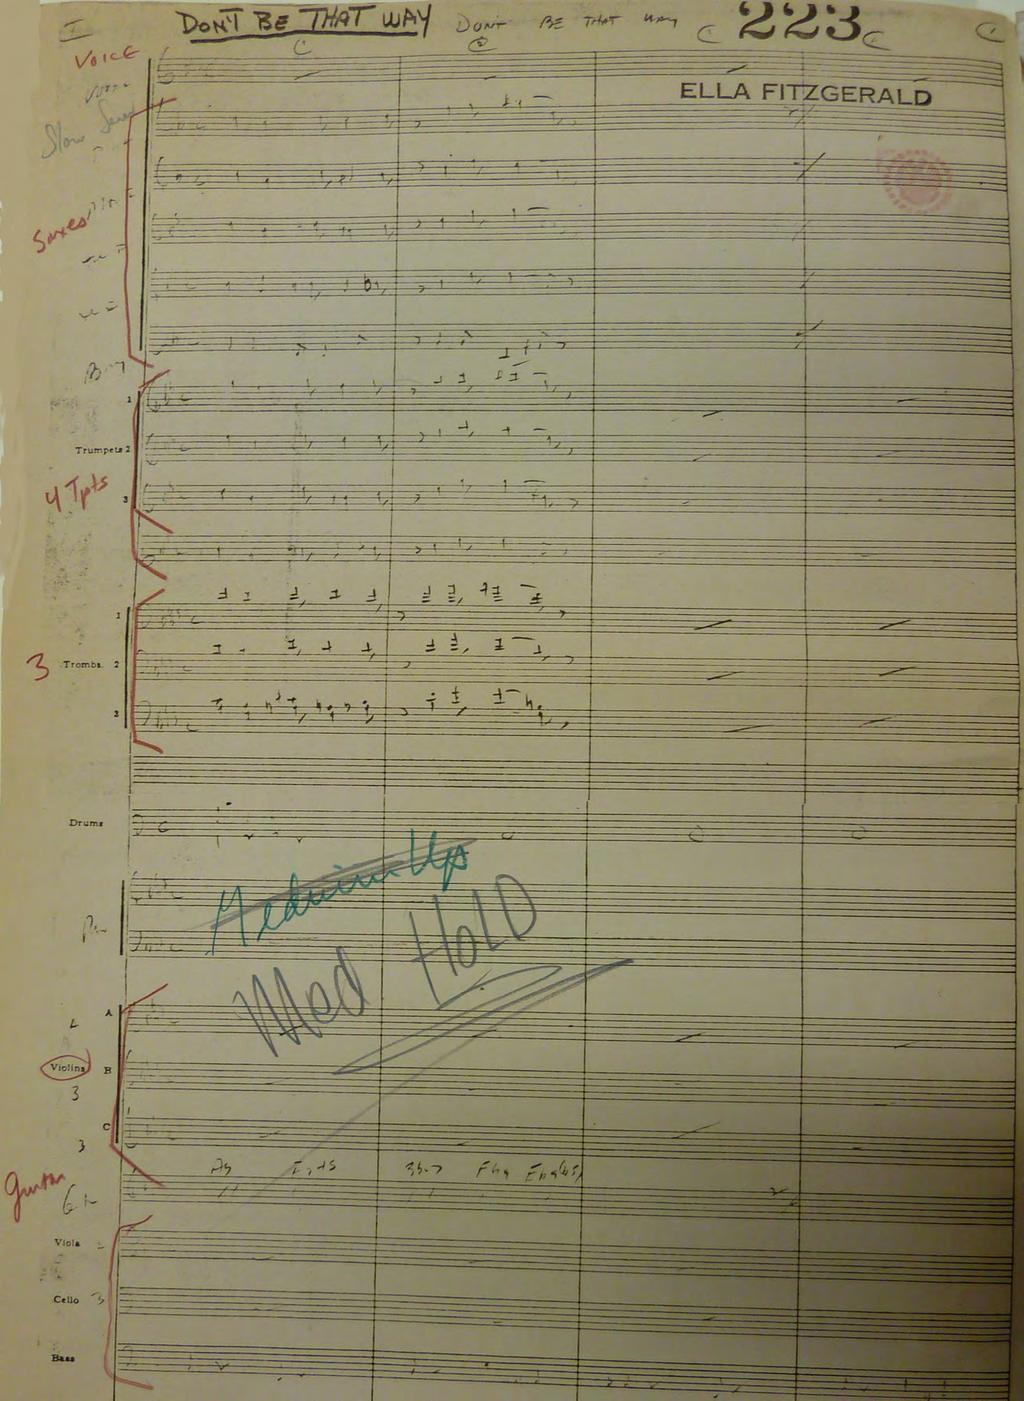 Here is the Nelson Riddle score from 1961.